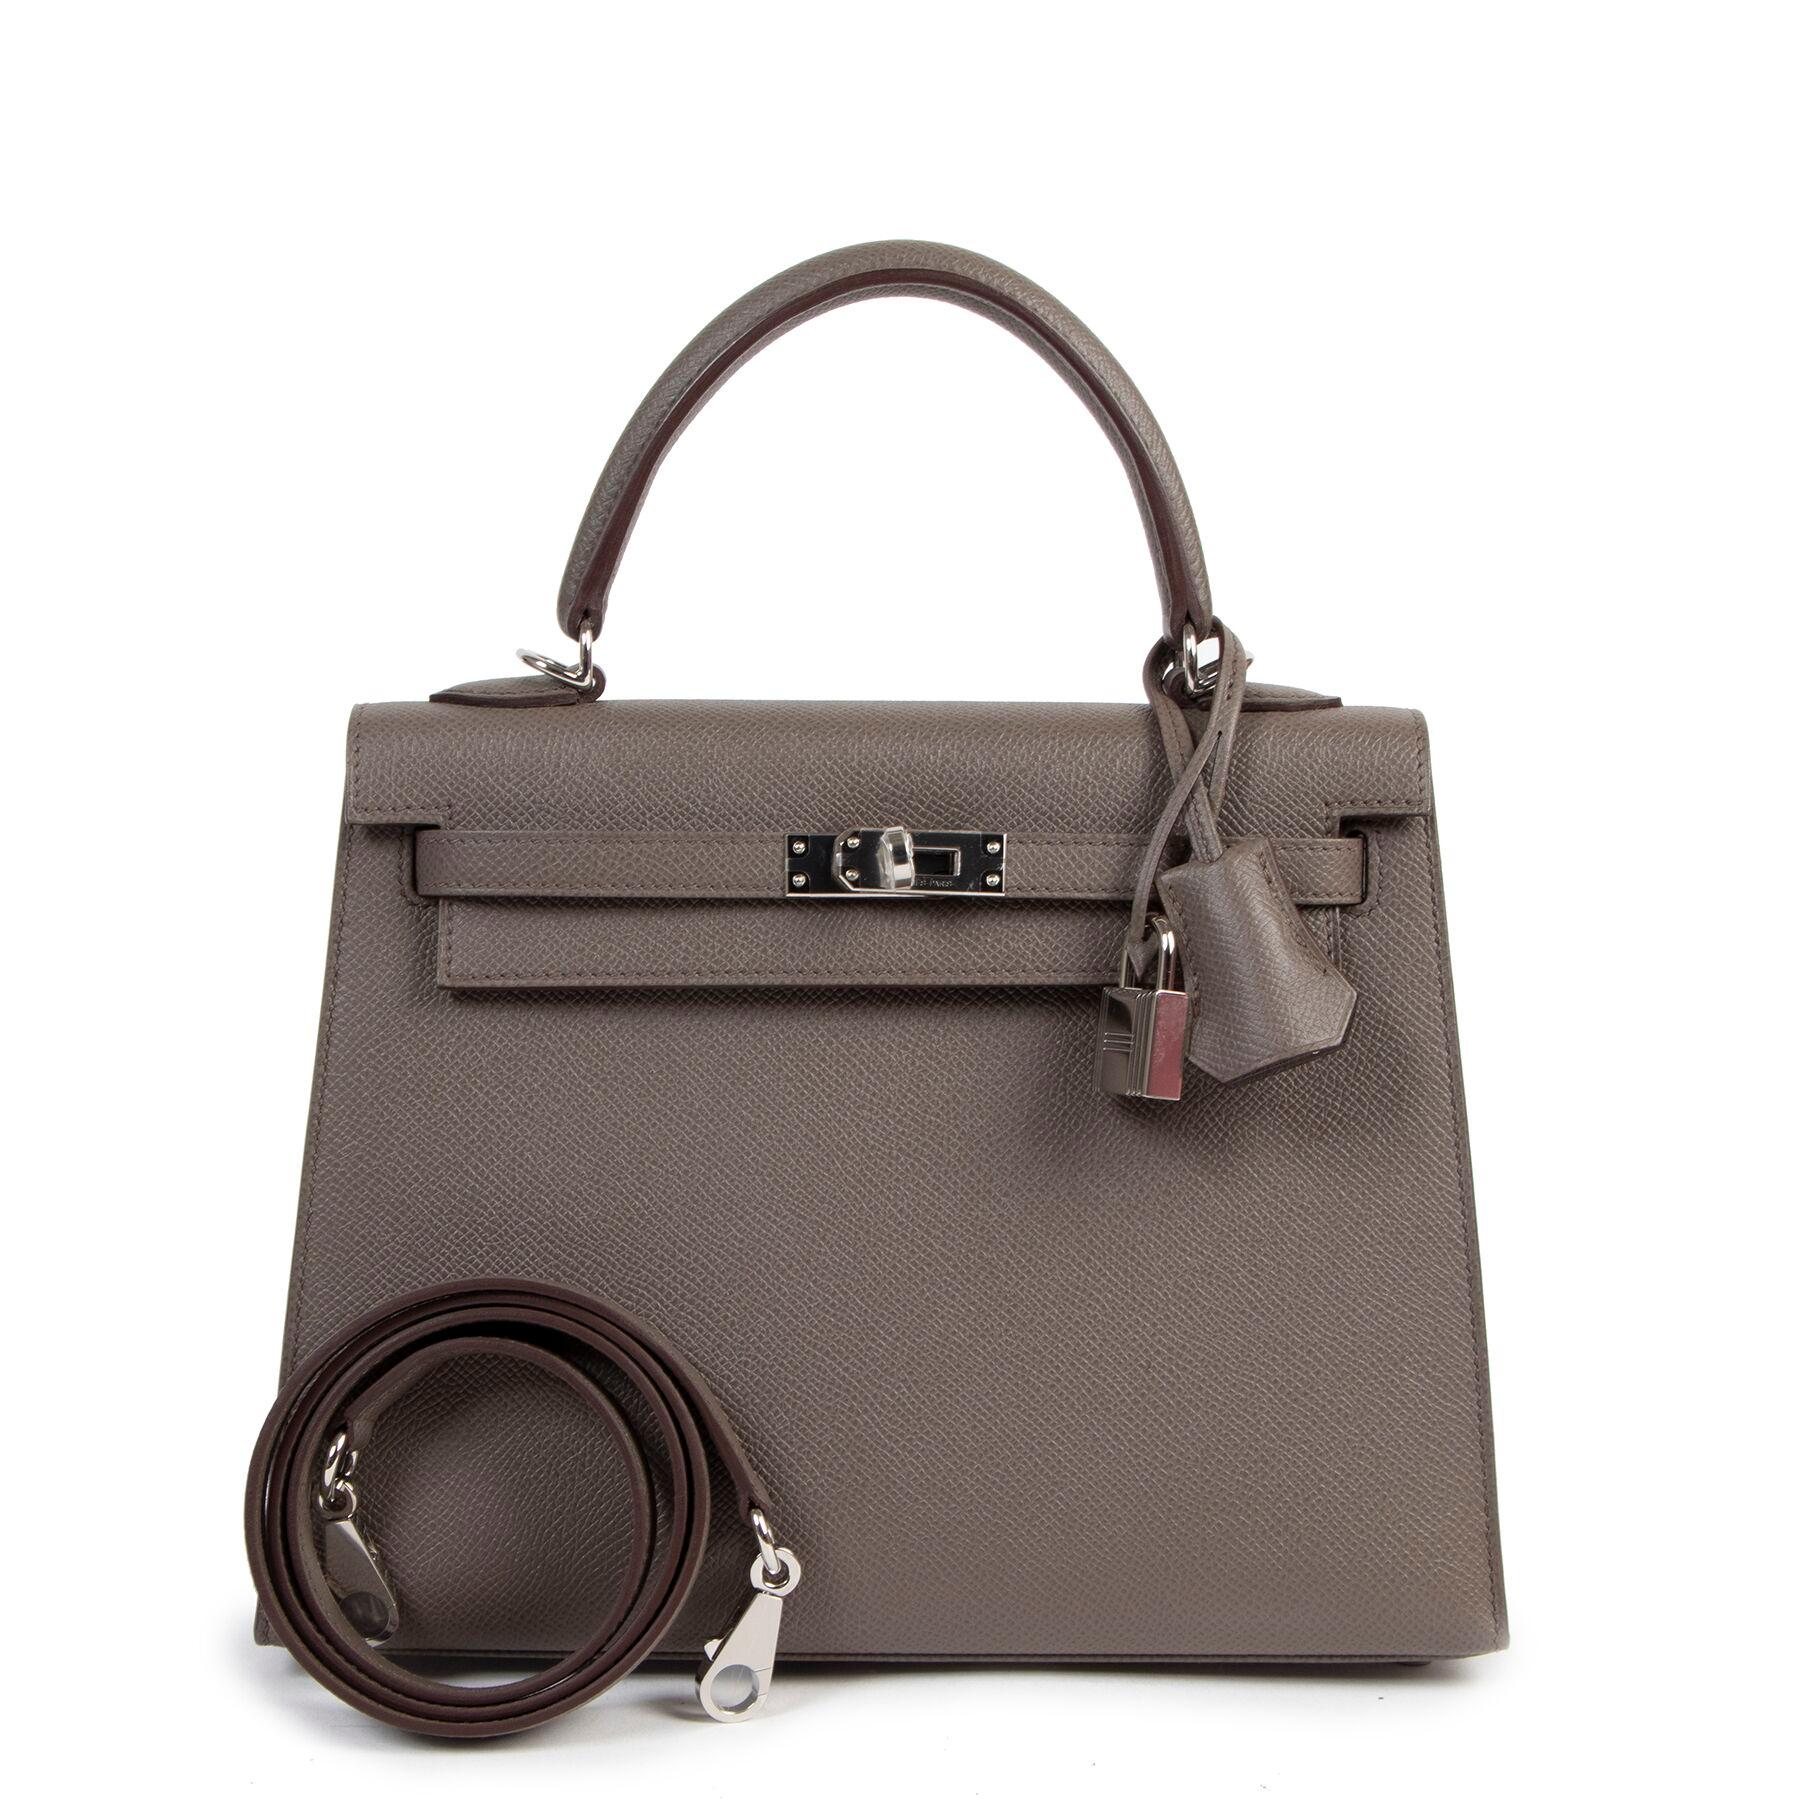 This rare Hermès Kelly 25 epsom etain with palladium hardware is the perfect mini bag.

The bag comes in full set with original store receipt.

This special Kelly has tonal stitching, a front toggle closure and a clochette with lock and two